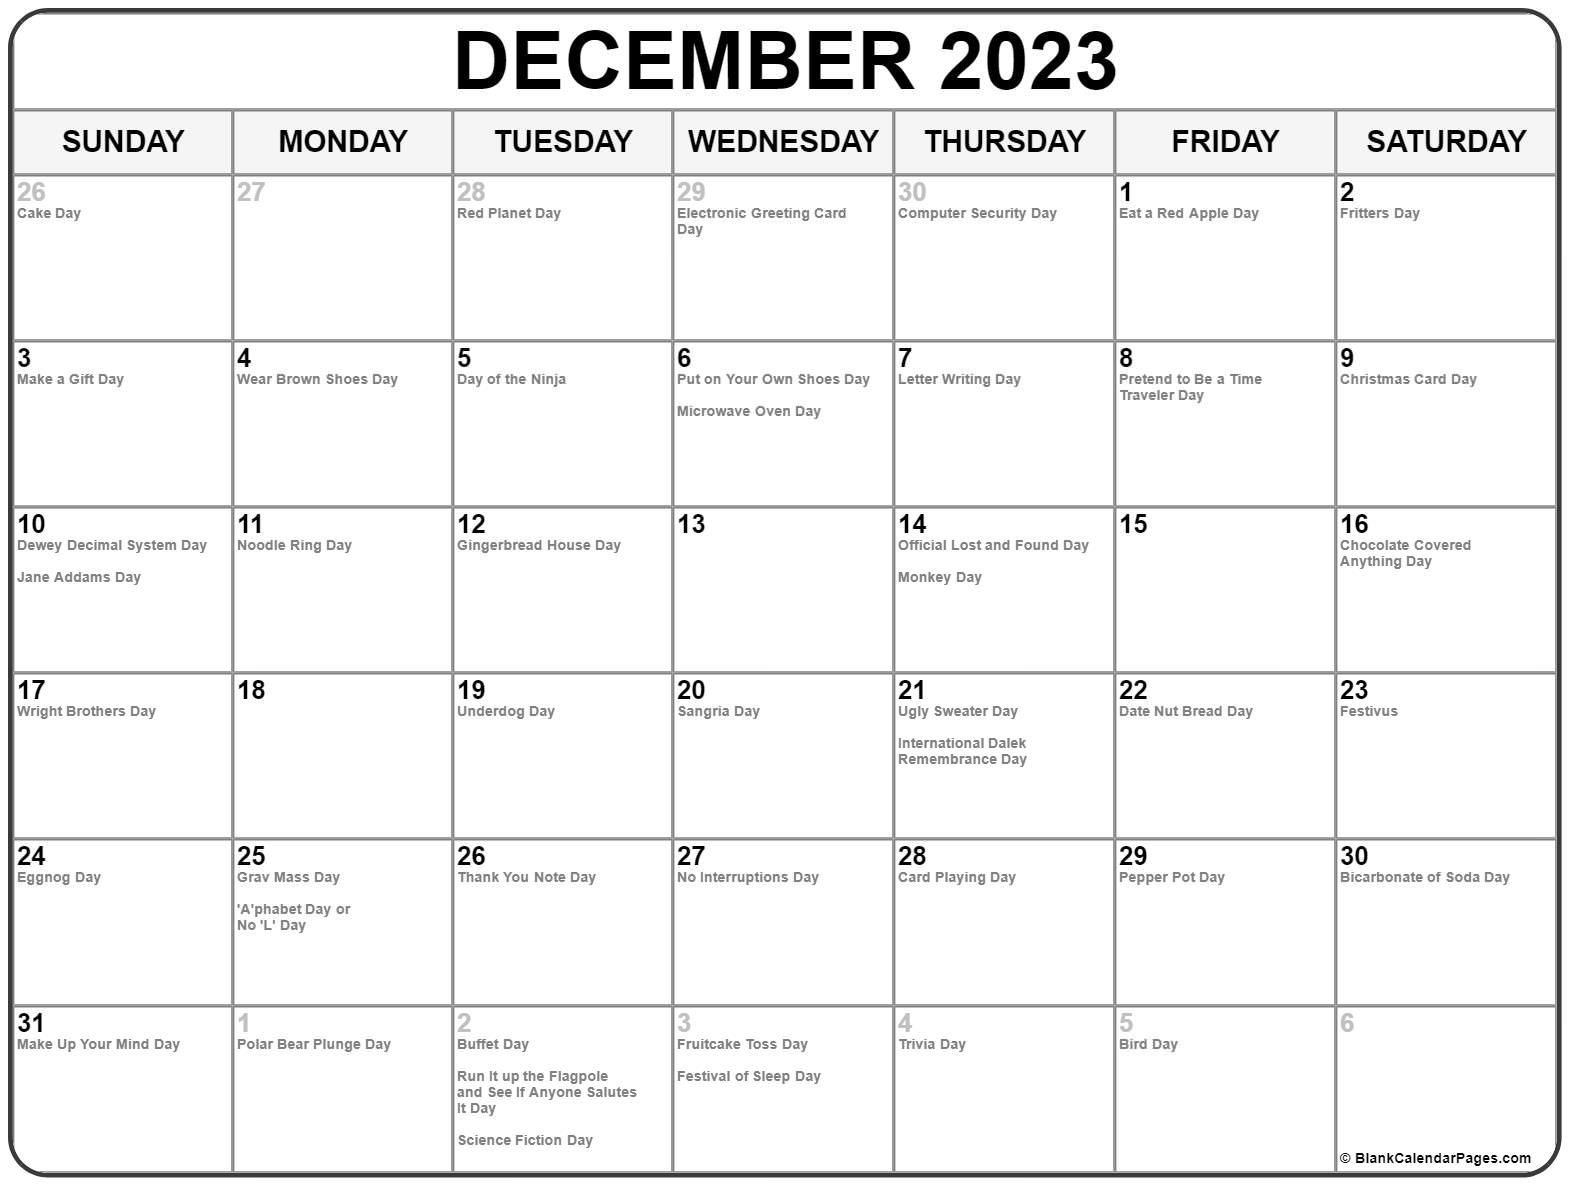 Christmas Events Near Me December 2023 Latest Ultimate Awesome List of